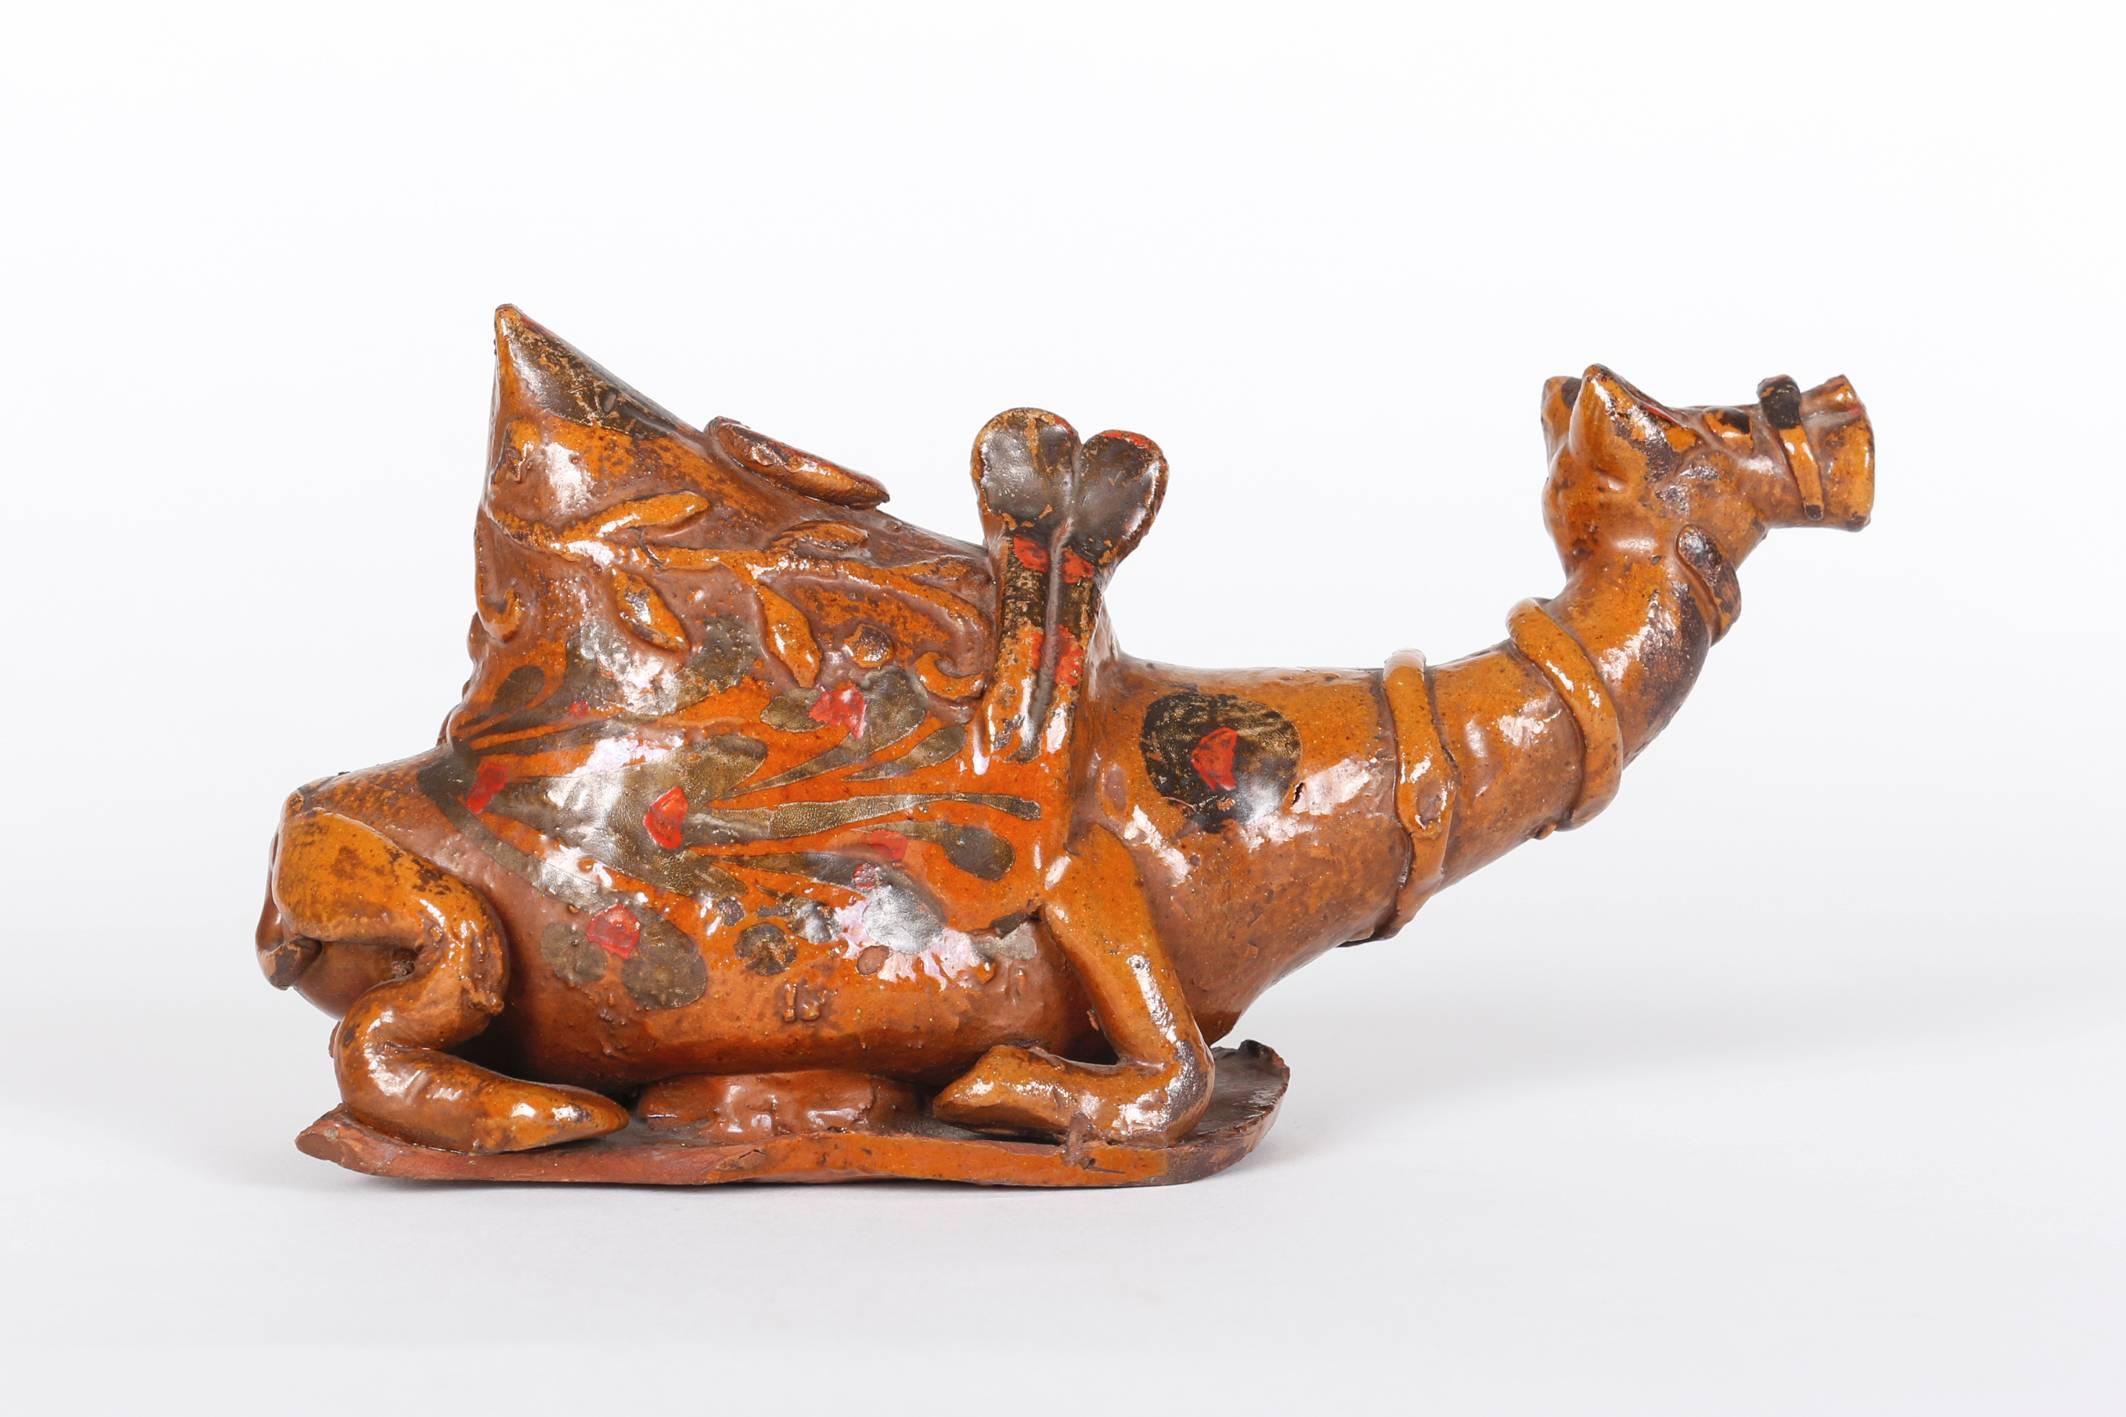 A kneeling camel with a saddle, its neck stretching out front, set on an oval plate. Red earthenware with a yellow glaze. Strikingly decorated on the back with a leafy branch in relief, the same motif being repeated on the bottom in white paint over